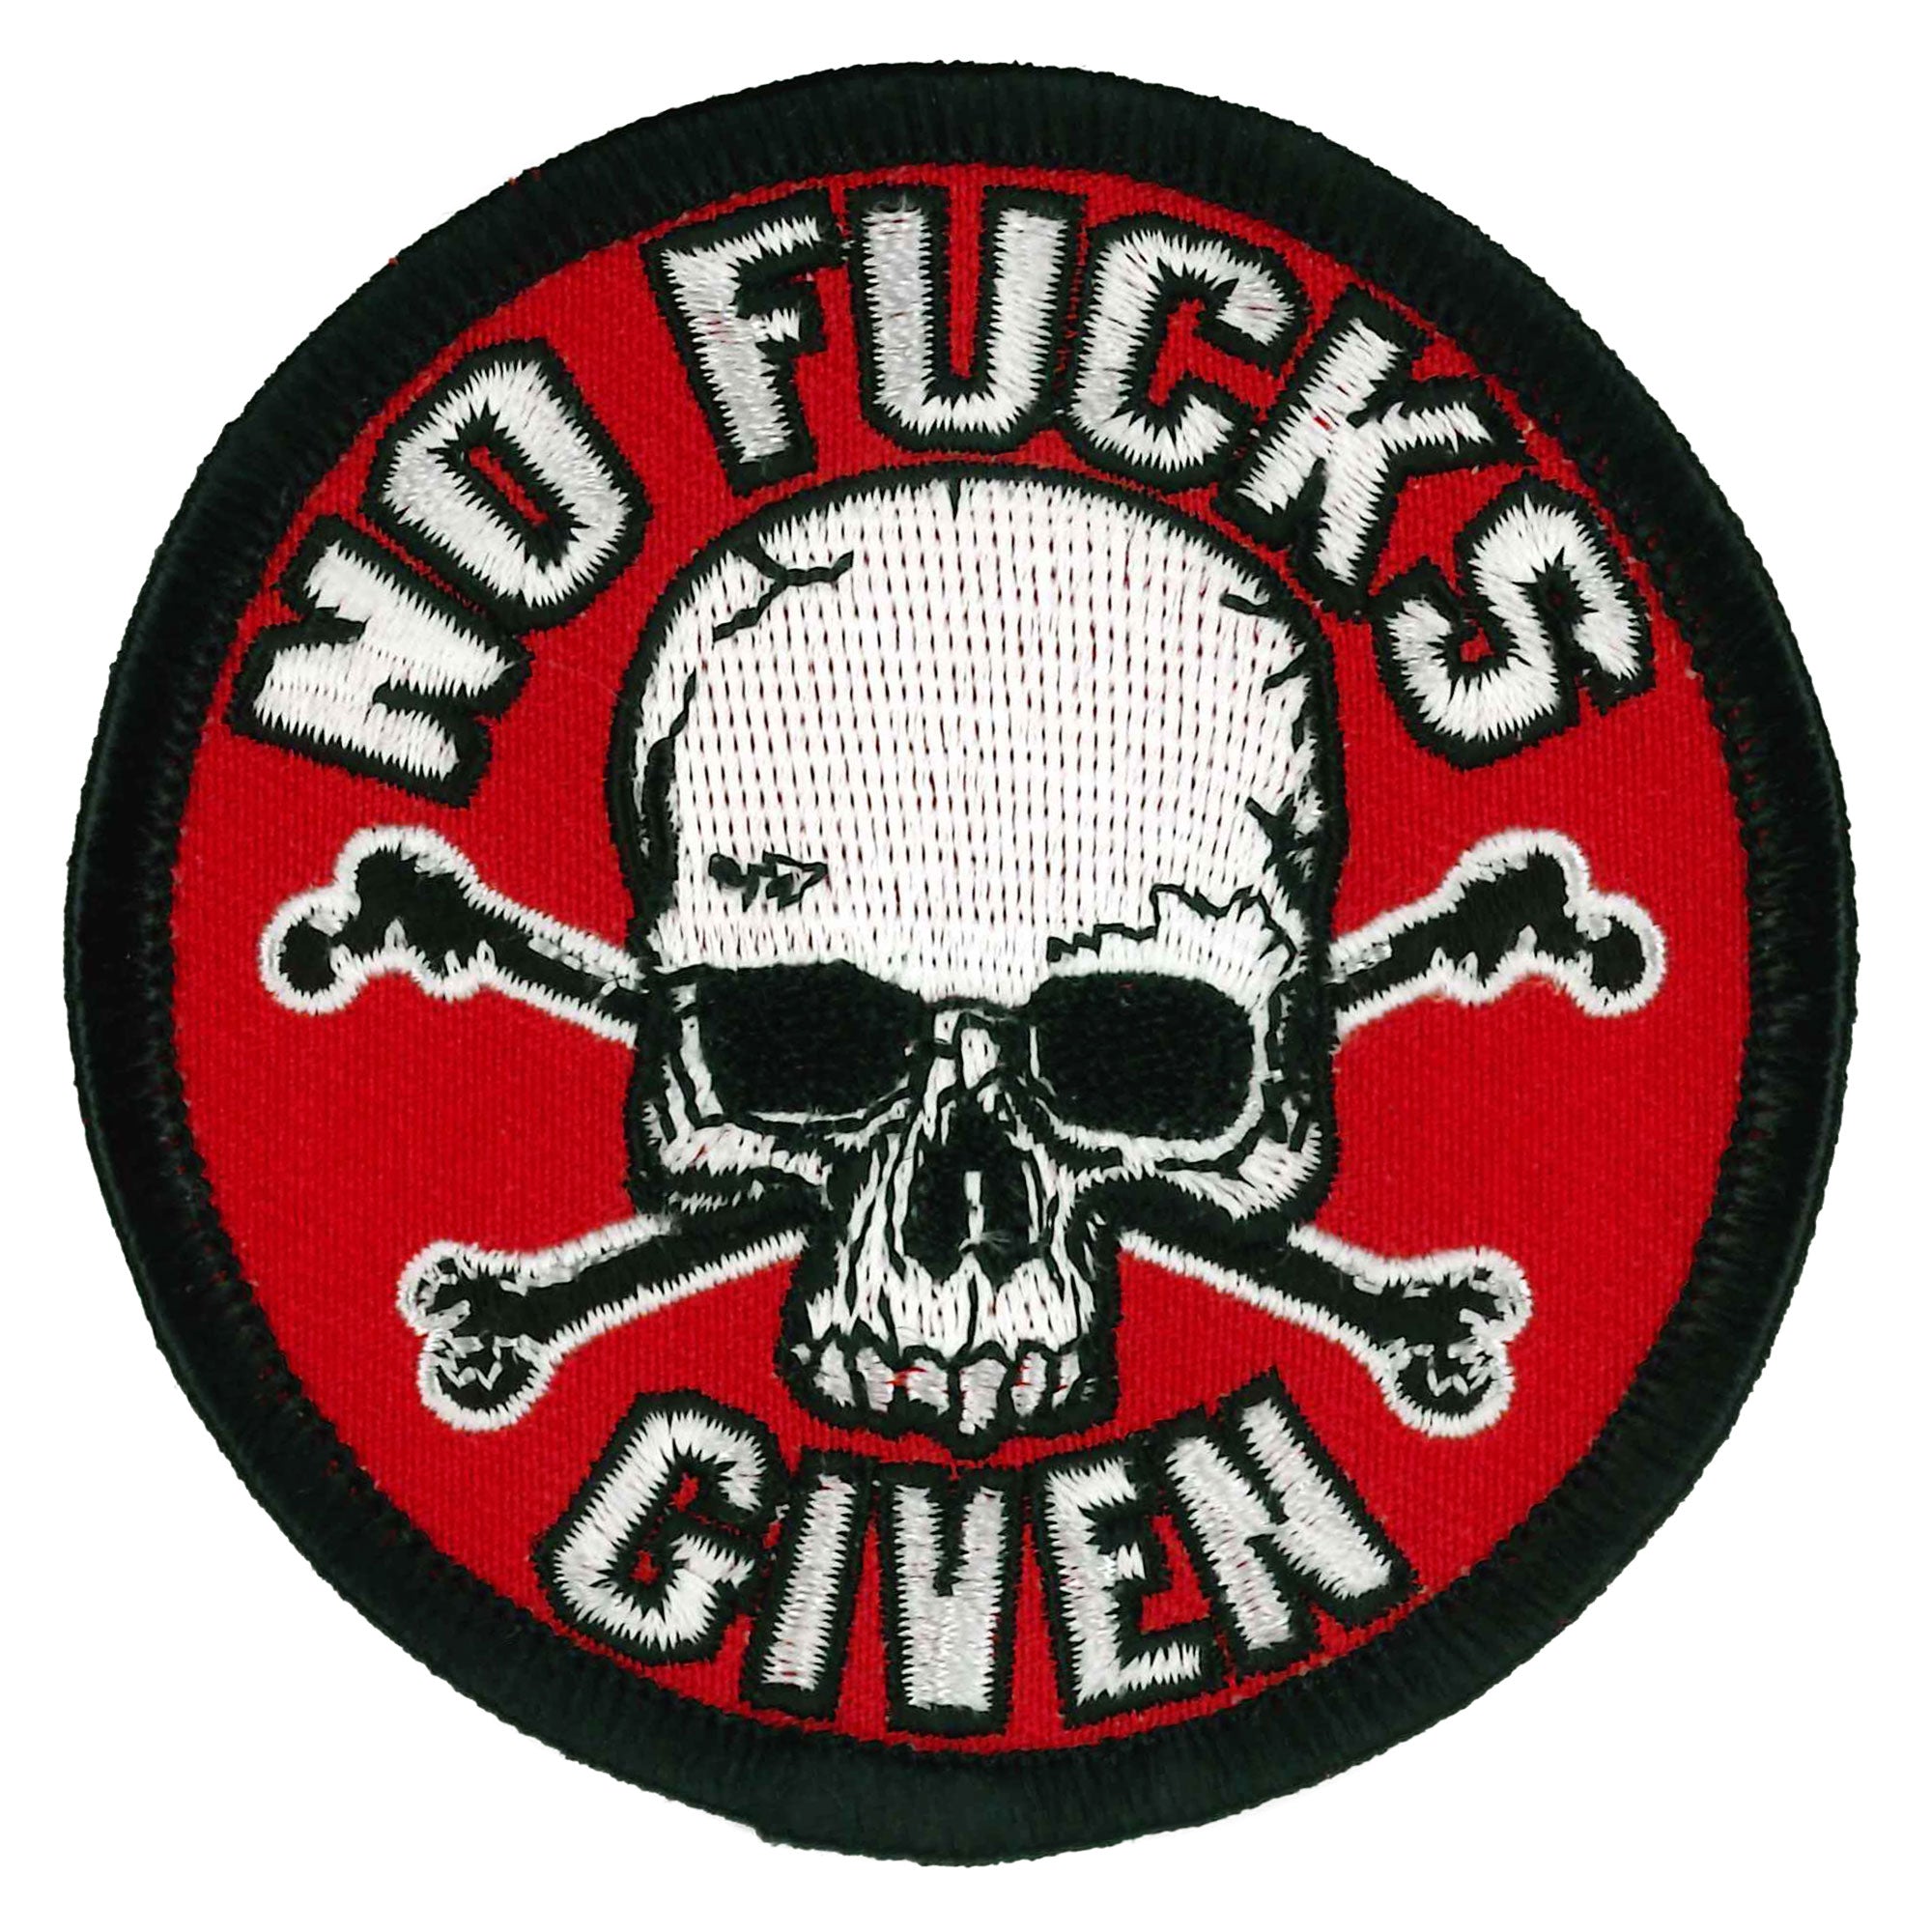 Hot Leathers No Fucks Given 3x3" Skull Patch